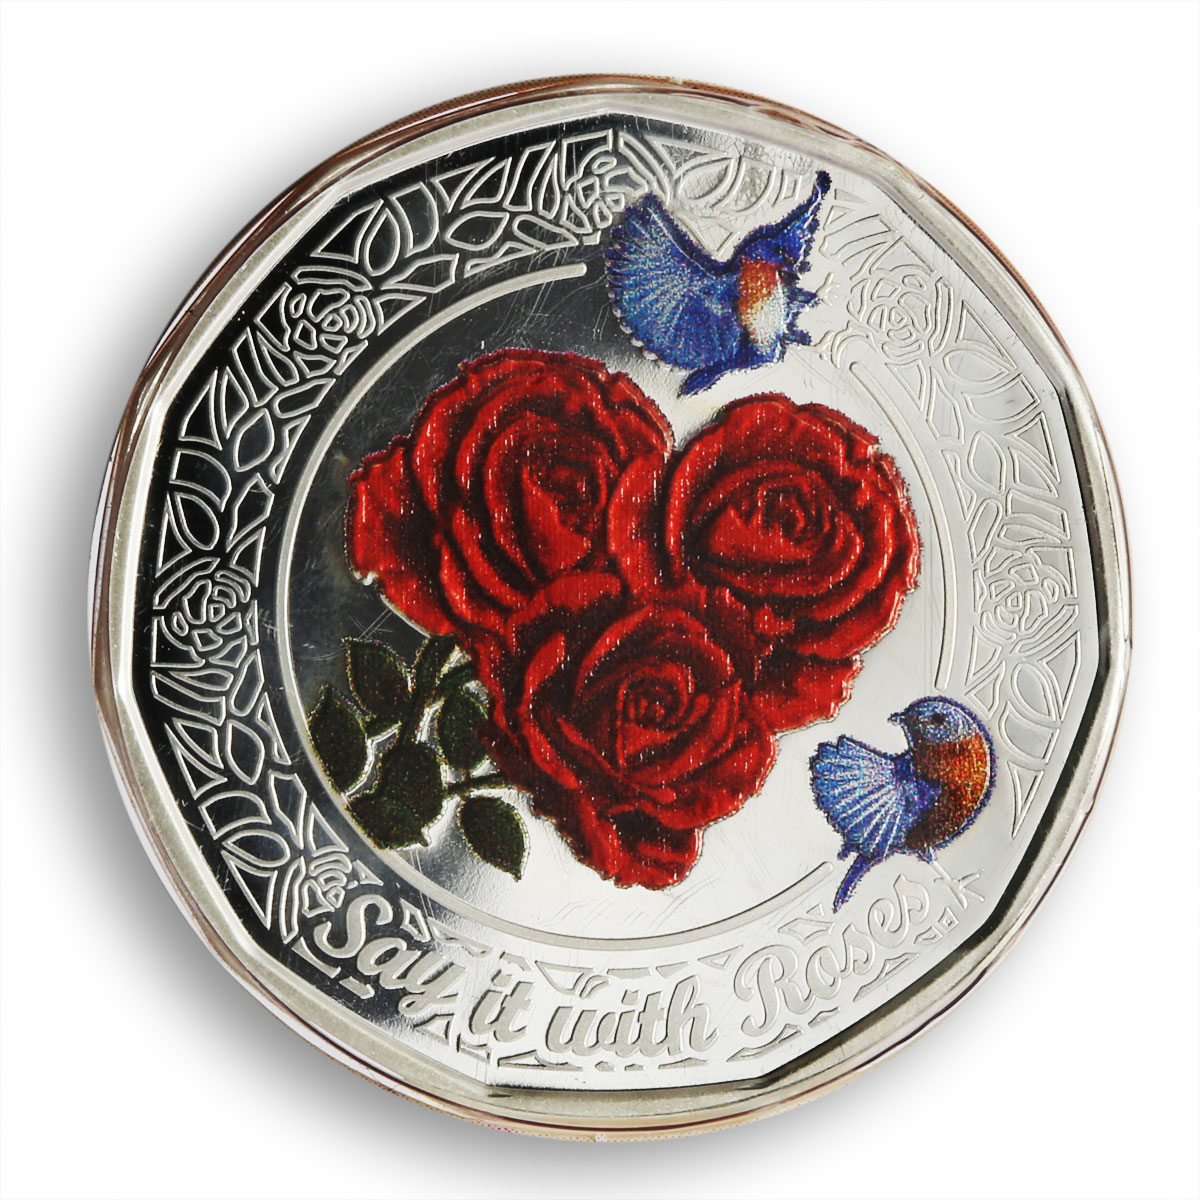 Cook Islands 1 dollar Say it with Roses colored proof silver coin 2011